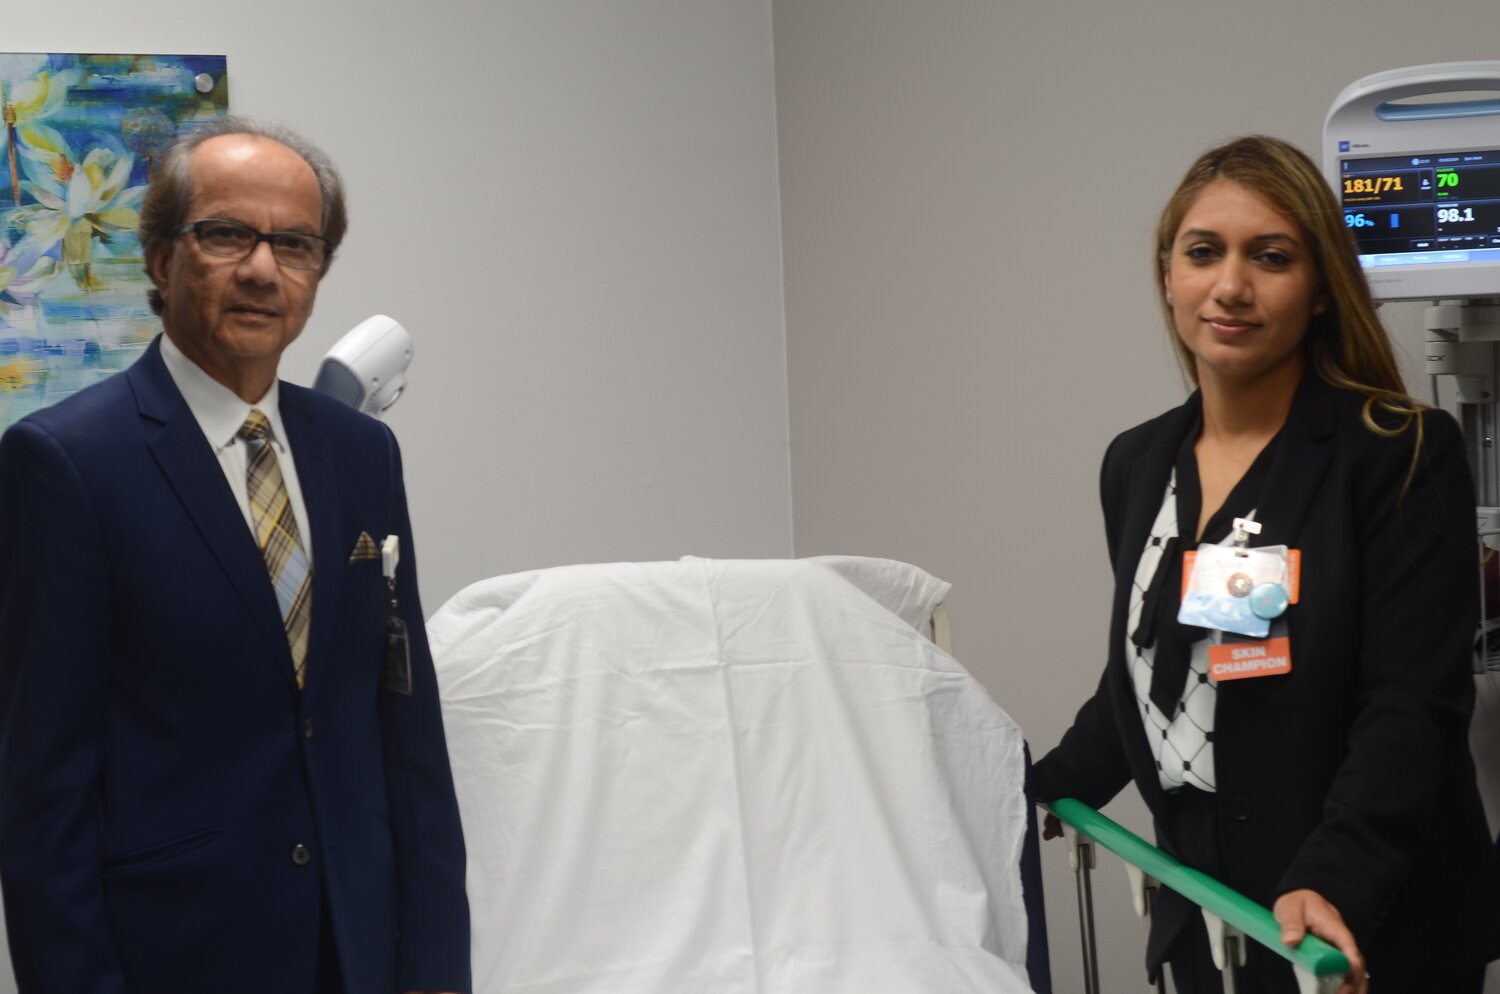 Medical Director Dr. Devendra Brahmbhatt and Nurse Manager Kamaljeet Kaur of the Comprehensive Wound Care & Hyperbaric Center at Long Island Jewish Valley Stream marked the opening of their newly renovated facility on Sept. 19.